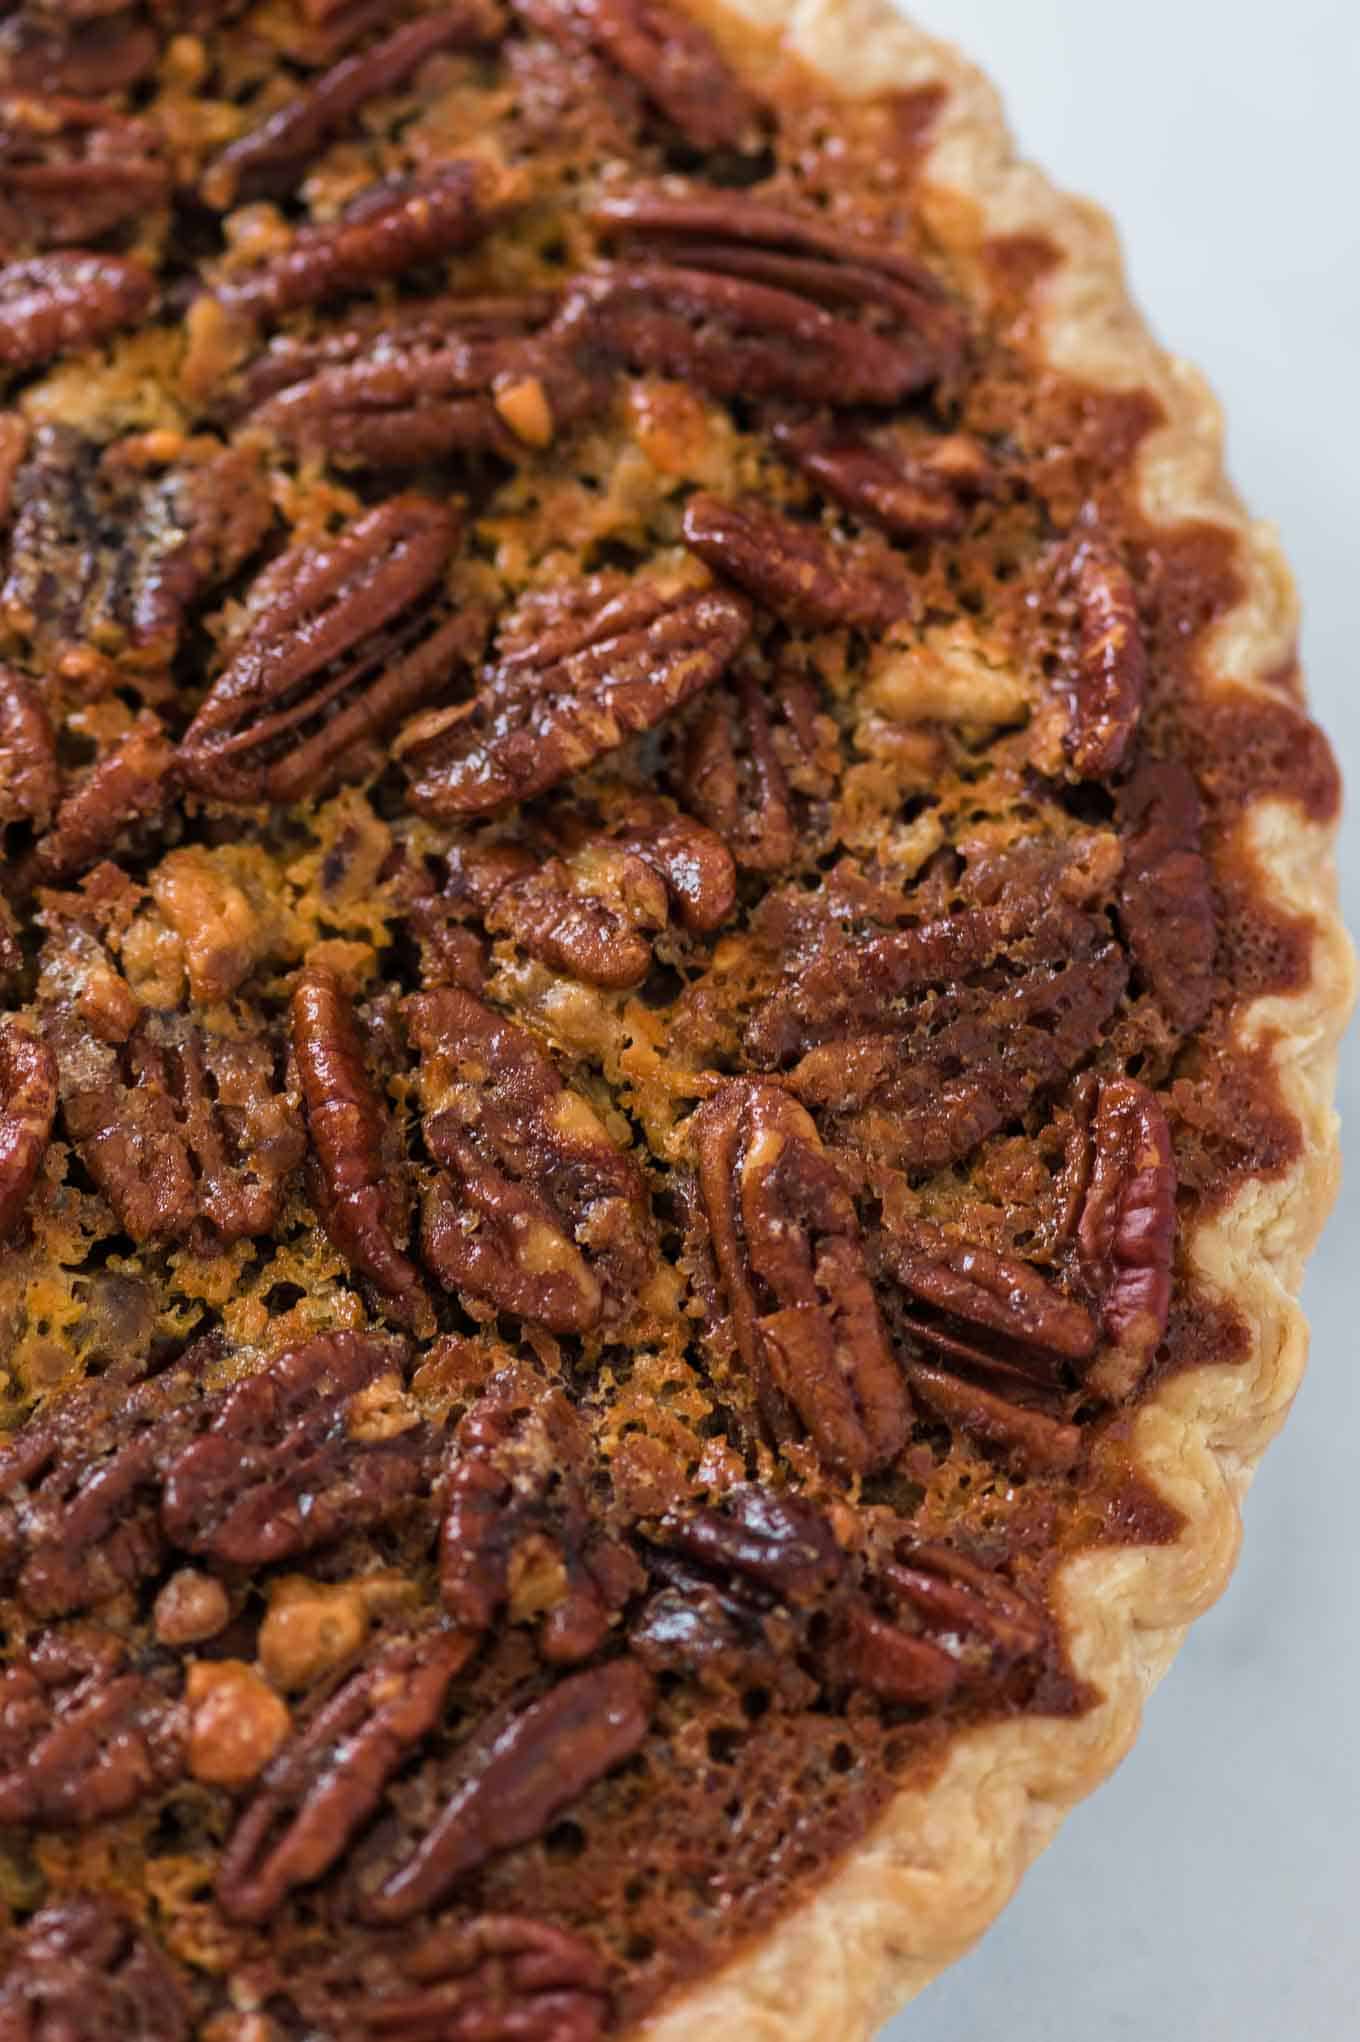 up close texture of the baked pecan pie